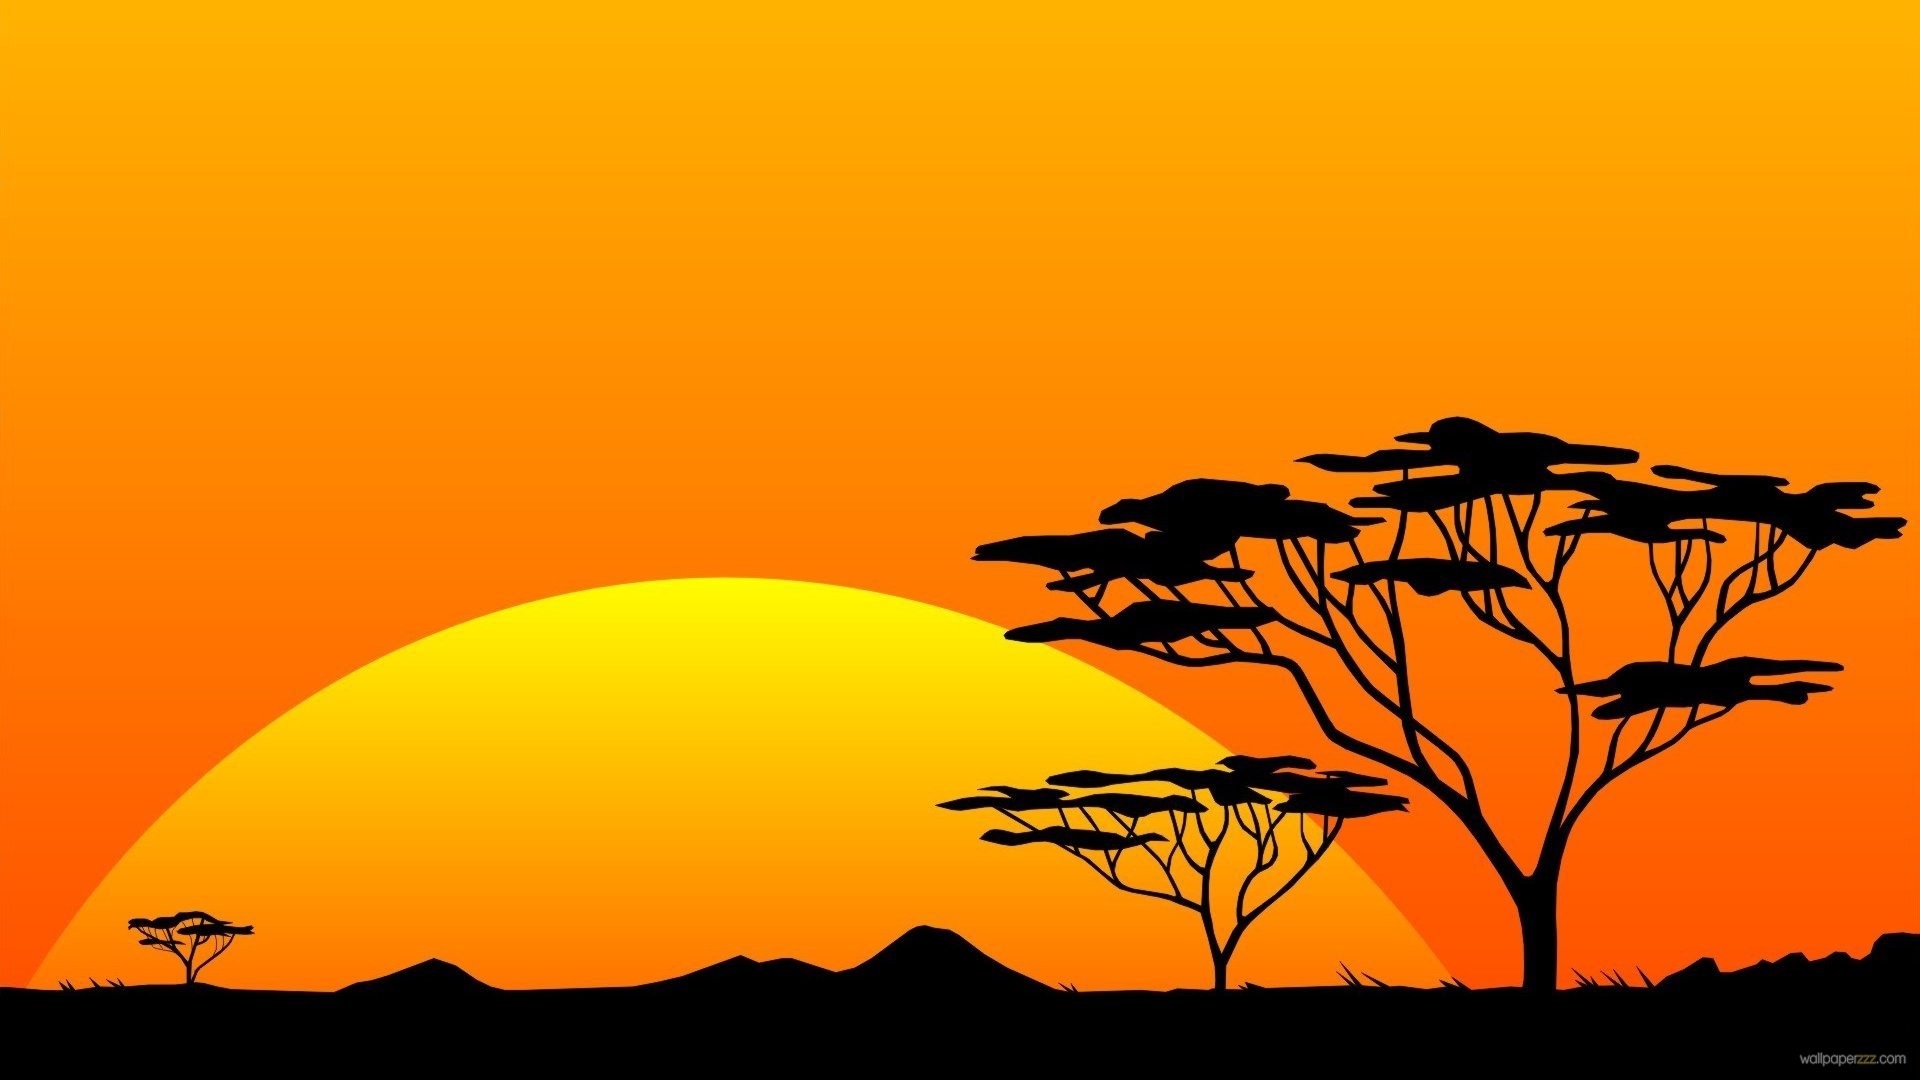 Africa wallpaper pictures